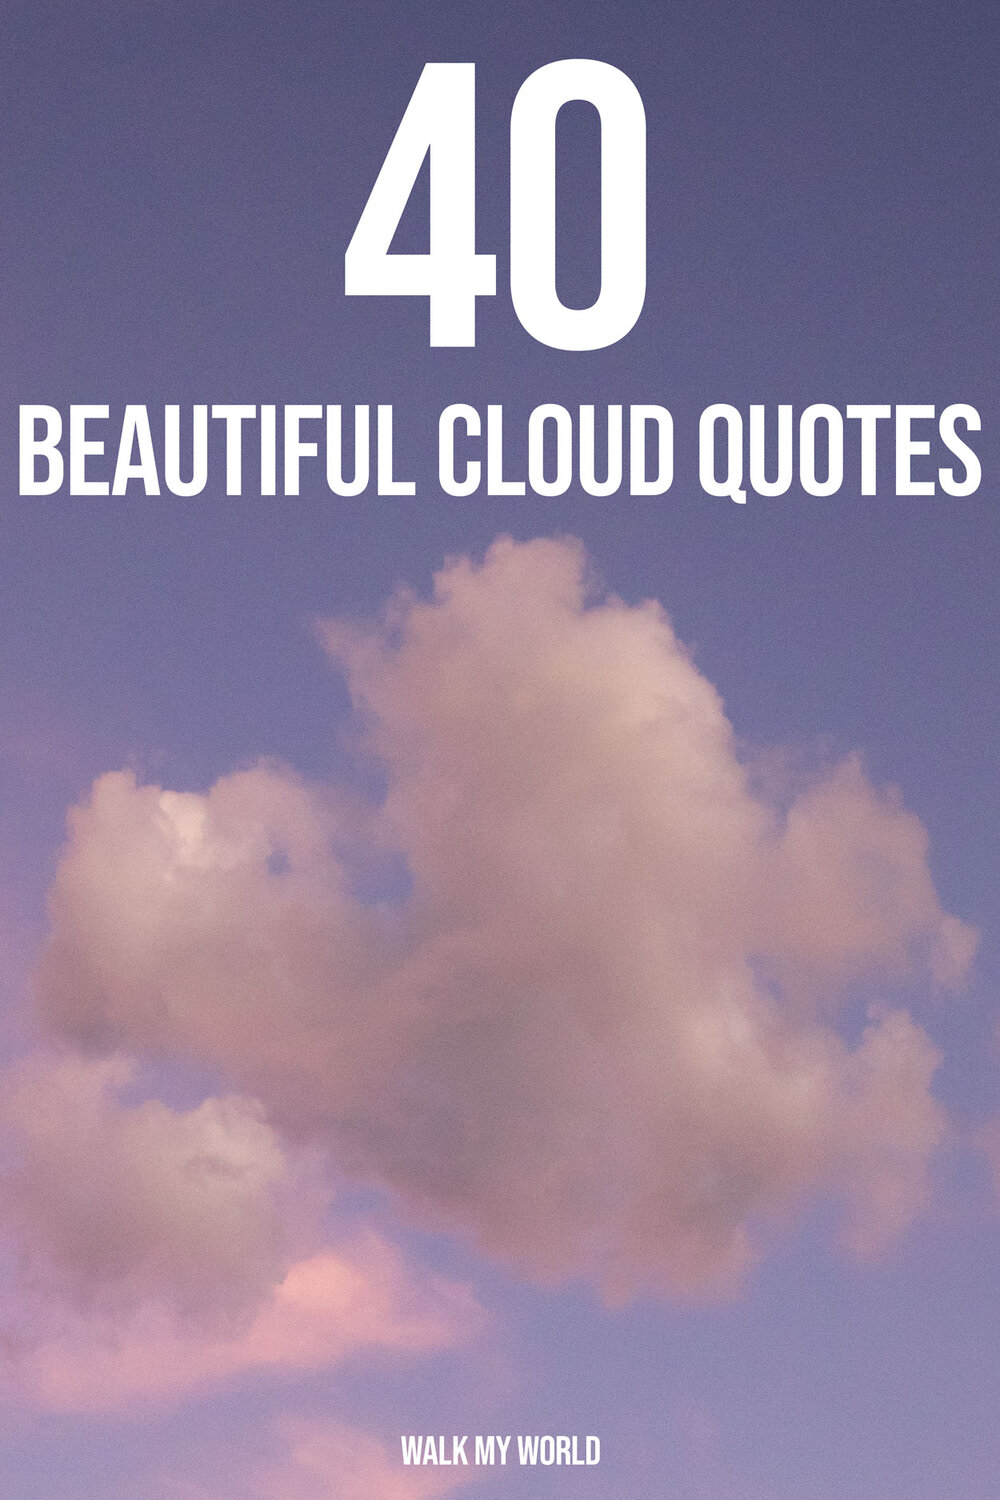 Artistic Cloudy Day Wallpapers